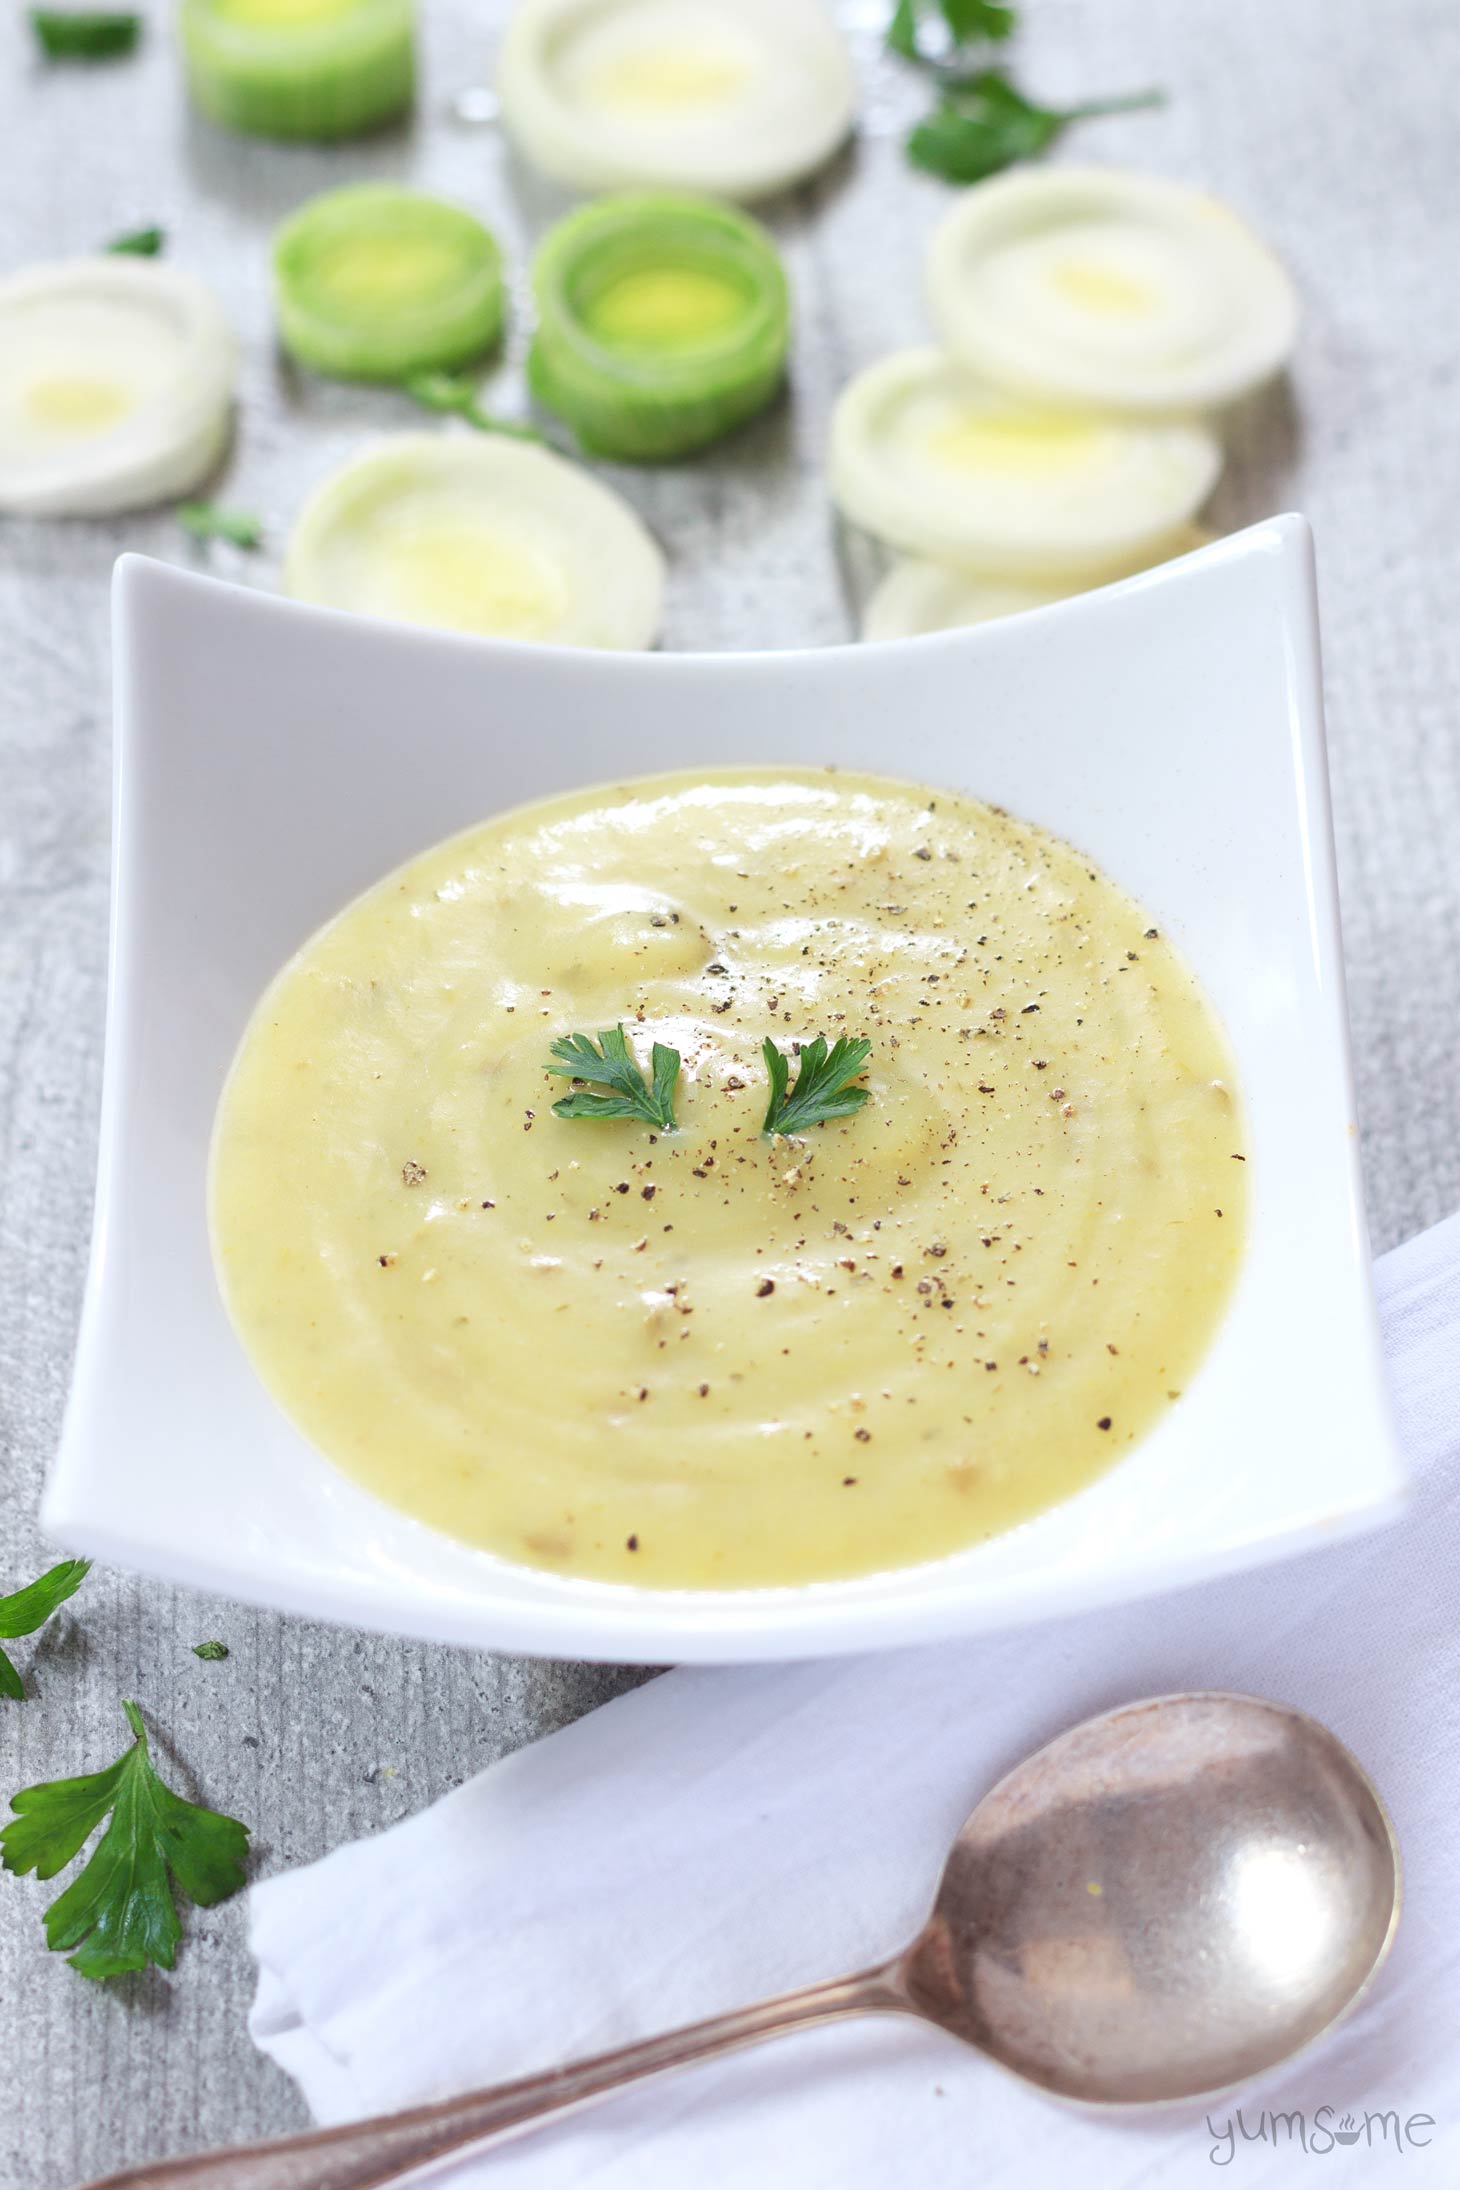 some cut leeks and a dish of hearty vegan potato, leek, and cheese soup | yumsome.com